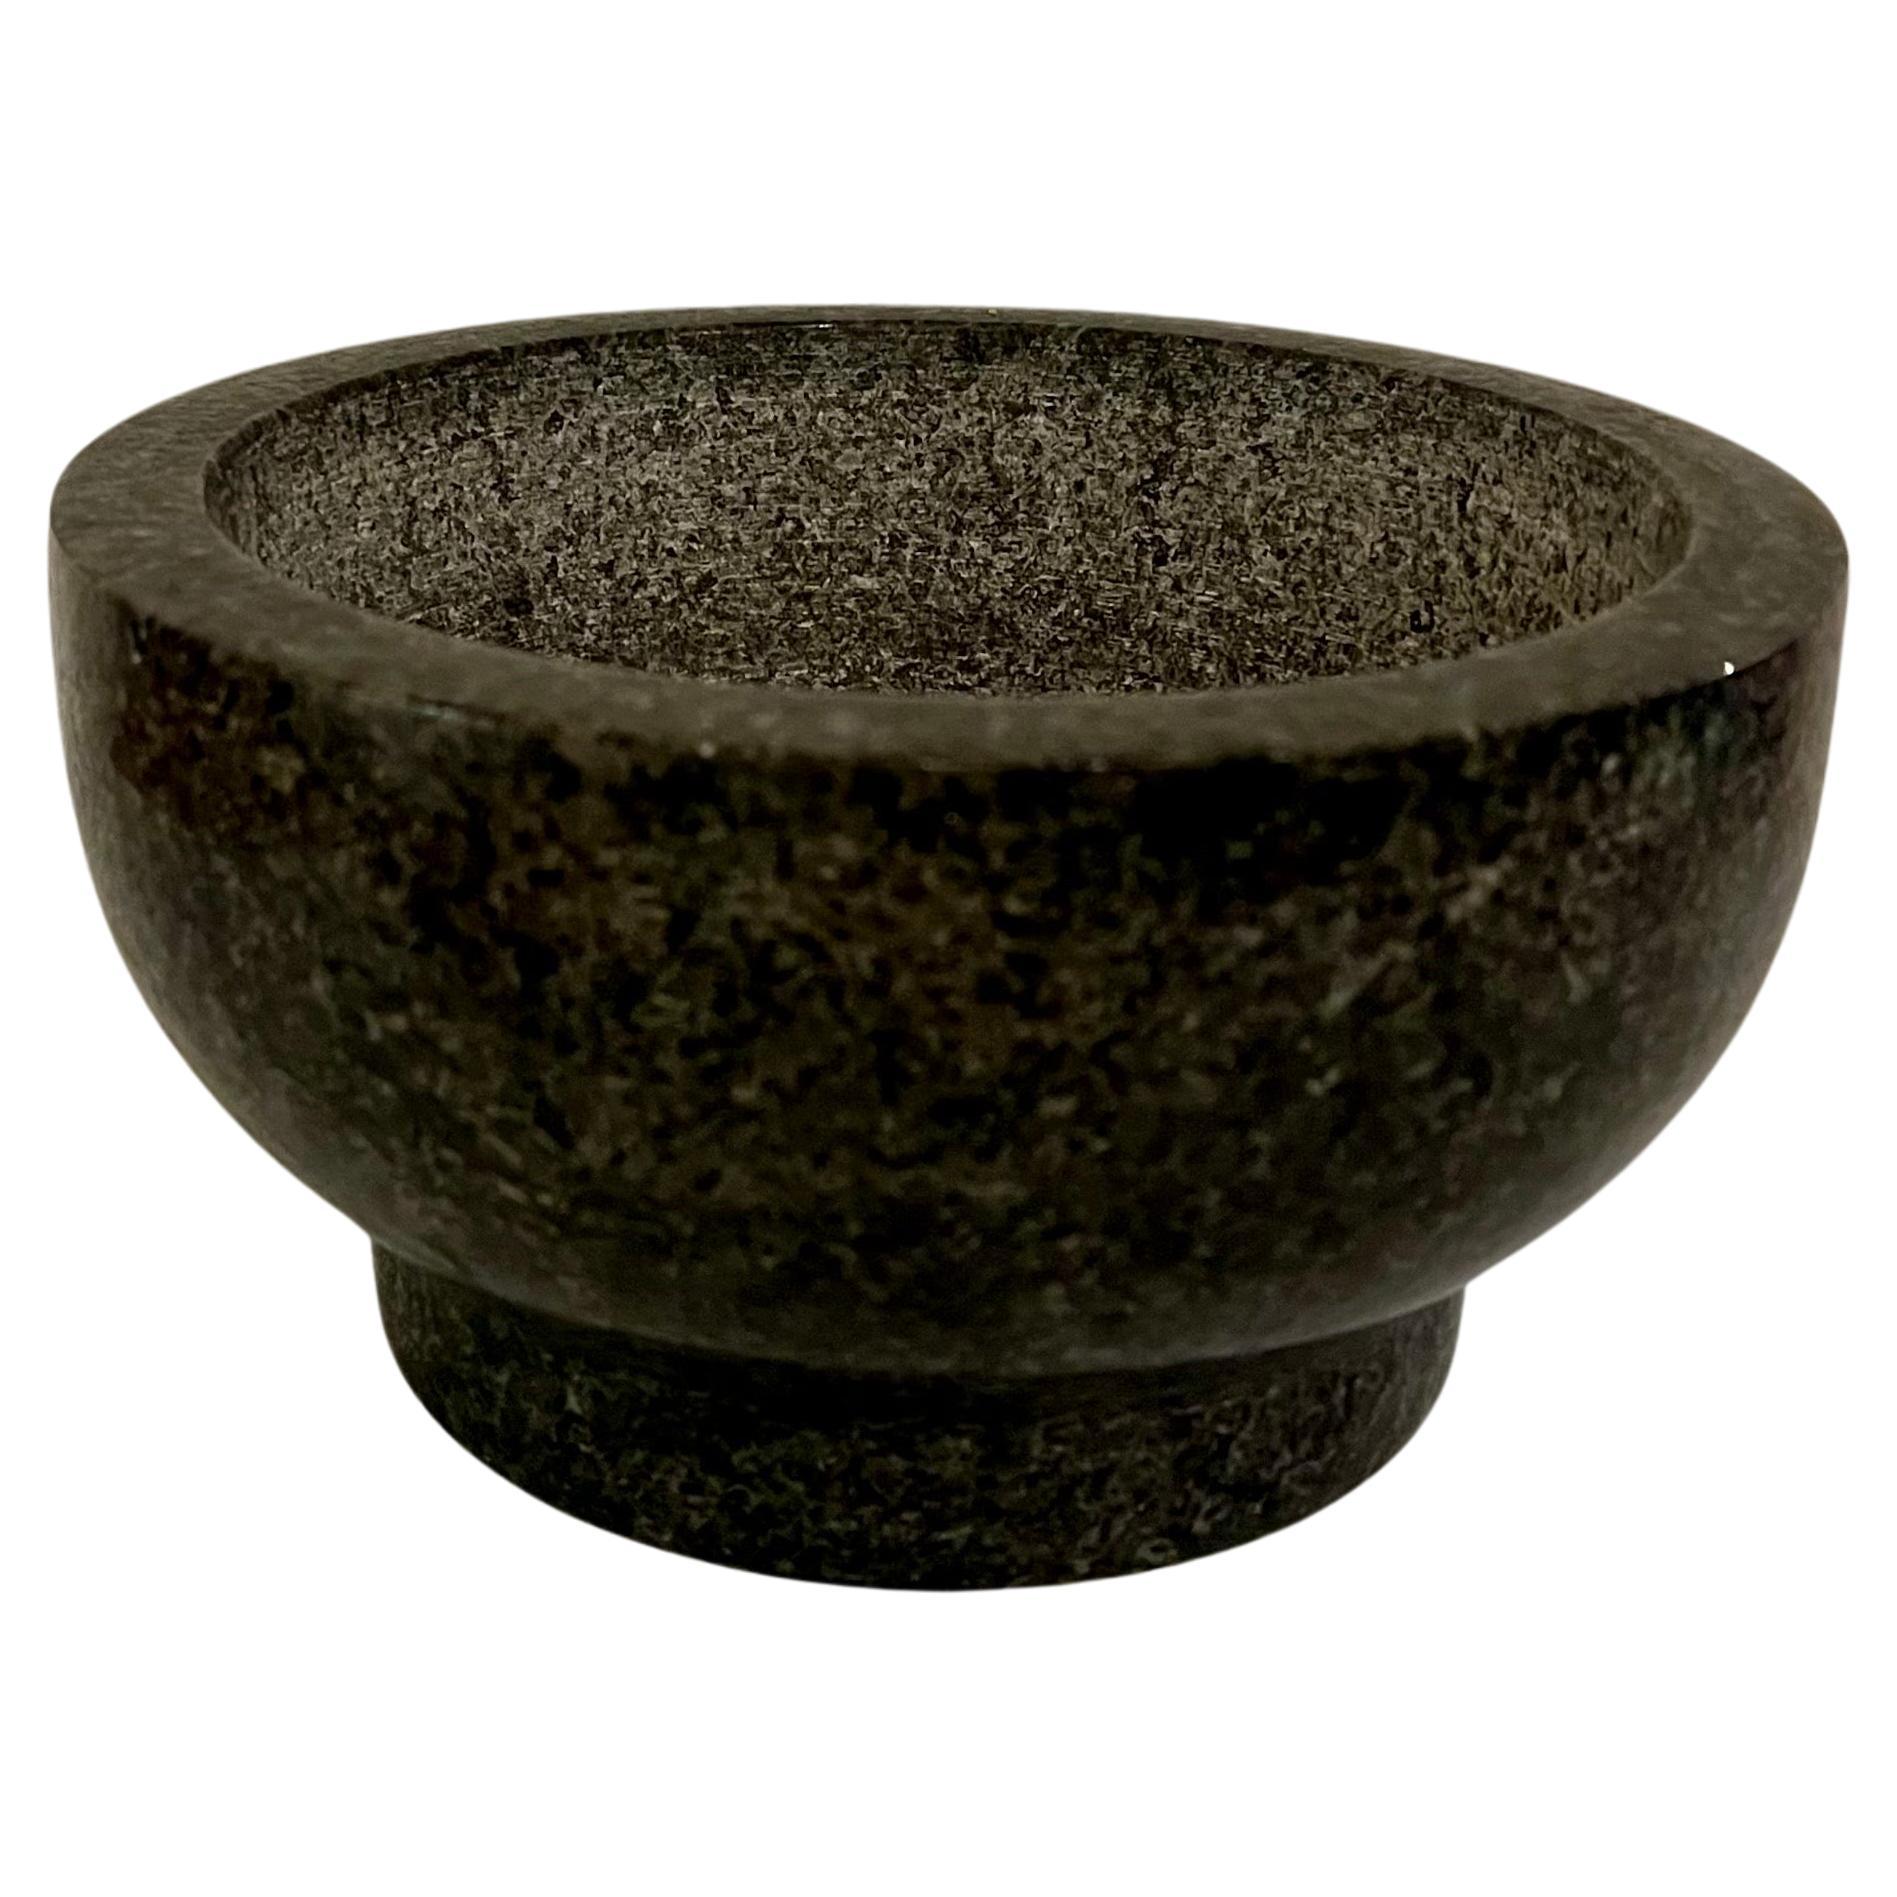 20th Century Postmodern Solid Polished Granite Massive Italian Footed Compote Bowl For Sale